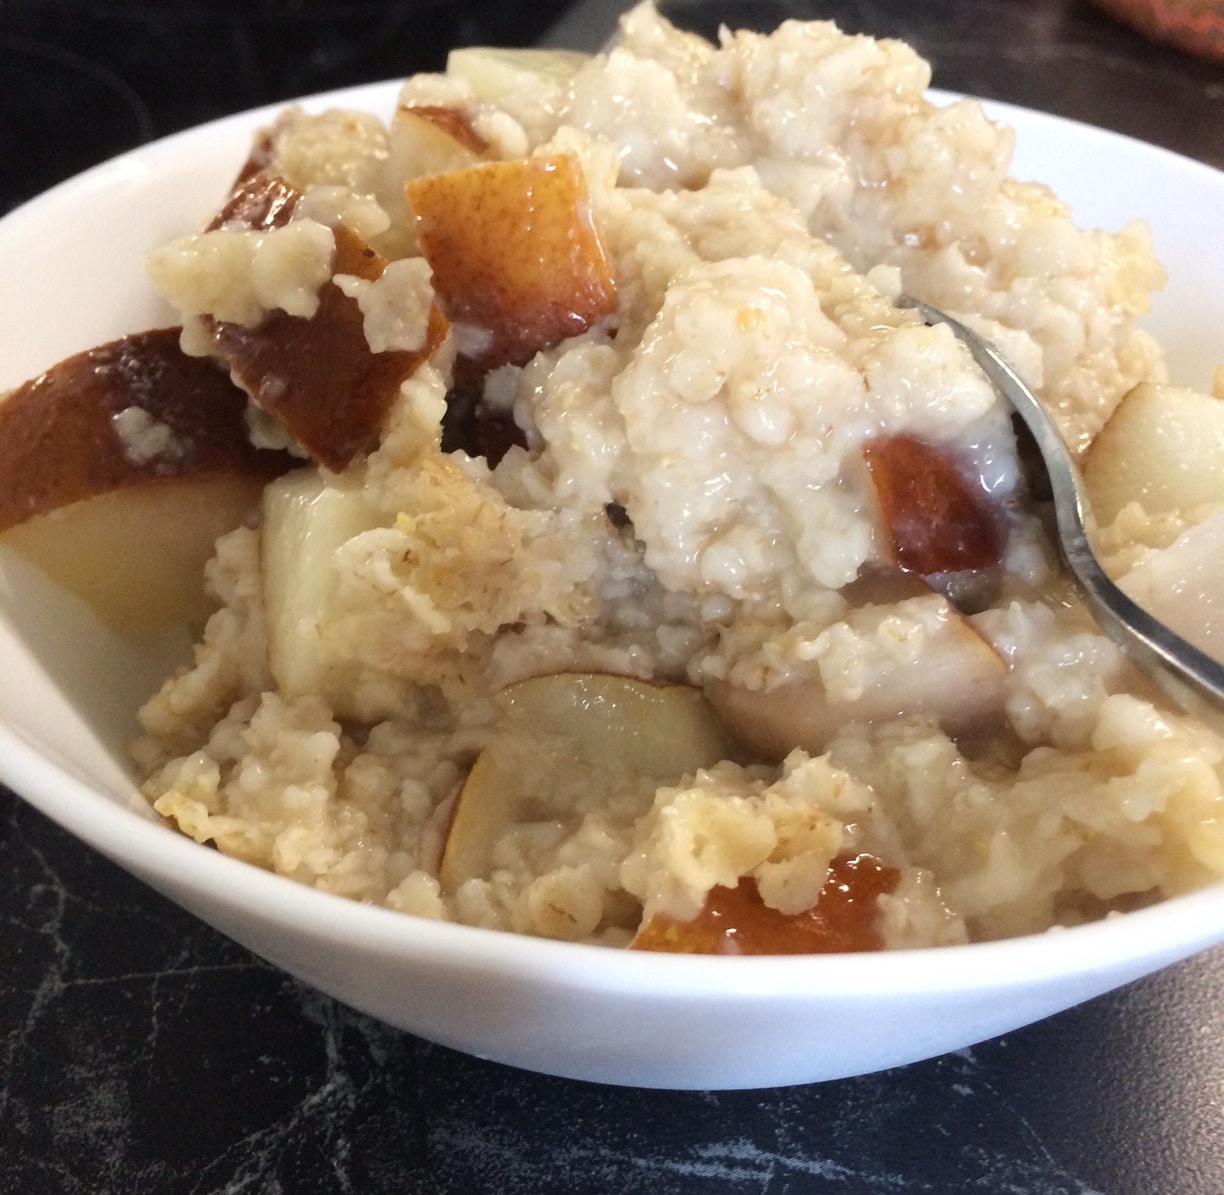 Quick and simple breakfast recipe: Oatmeal With Pear aka Gatsch